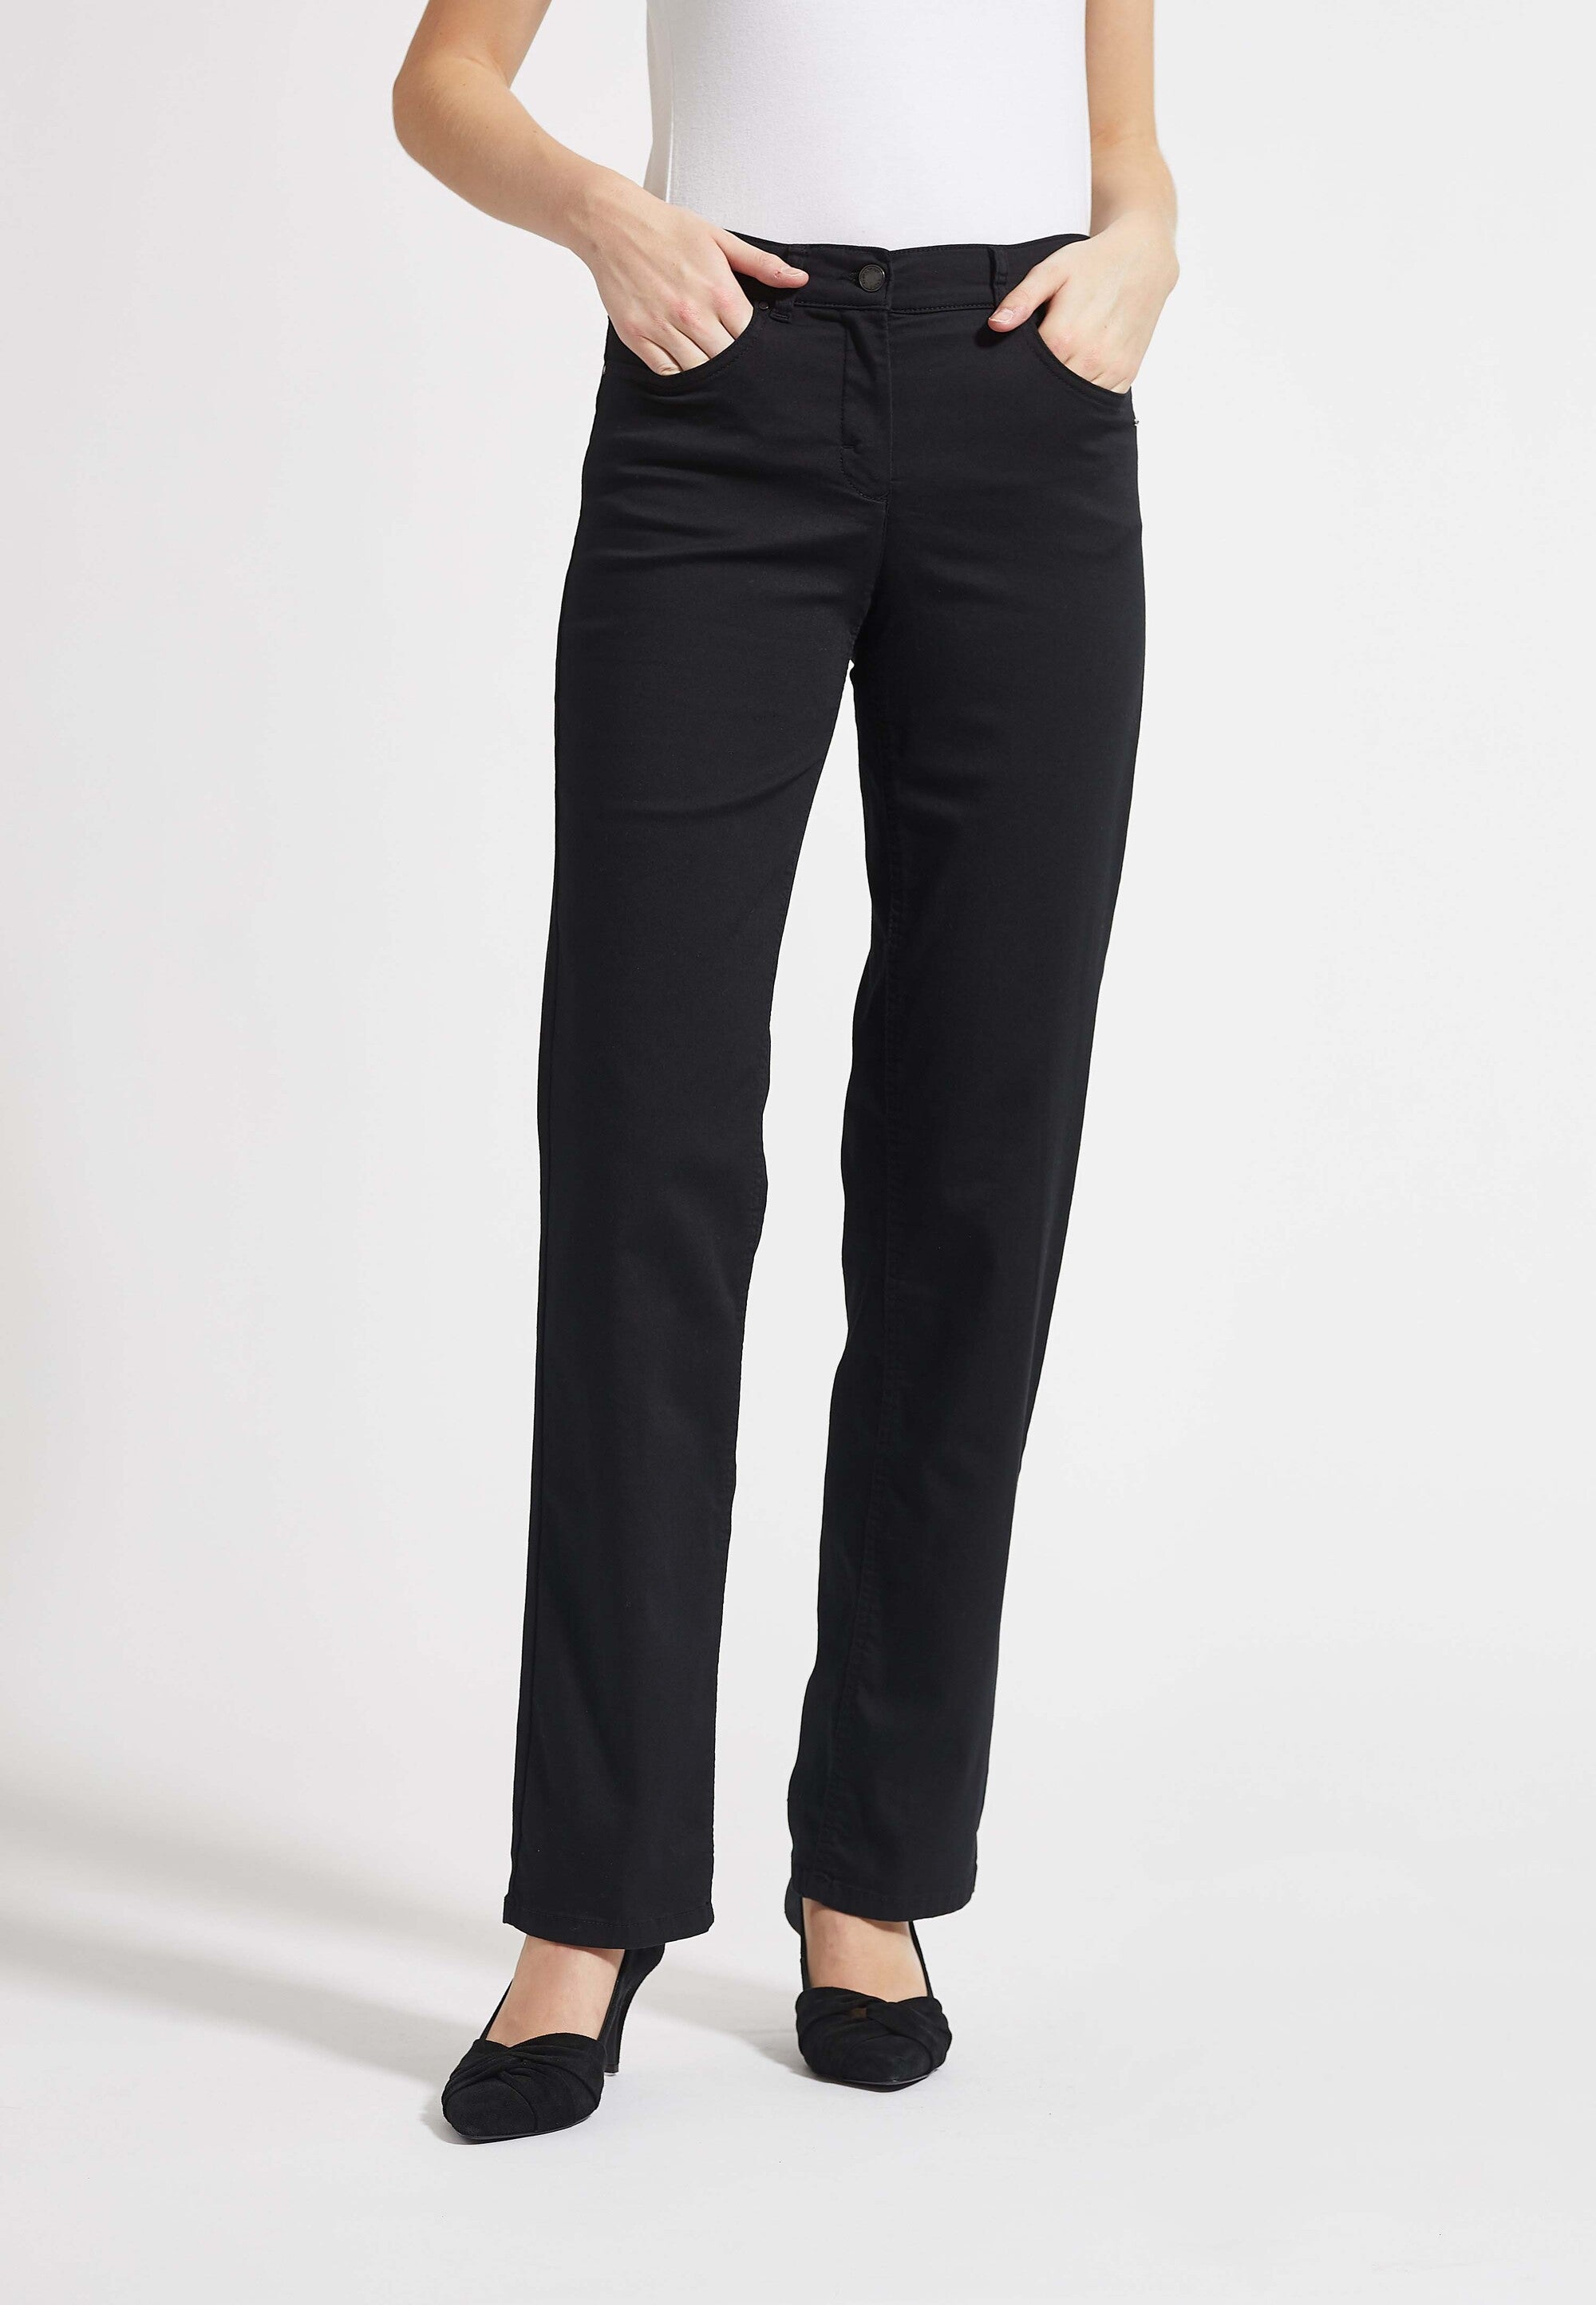 LAURIE Amelia Straight - Long Length Trousers STRAIGHT 99100 Black